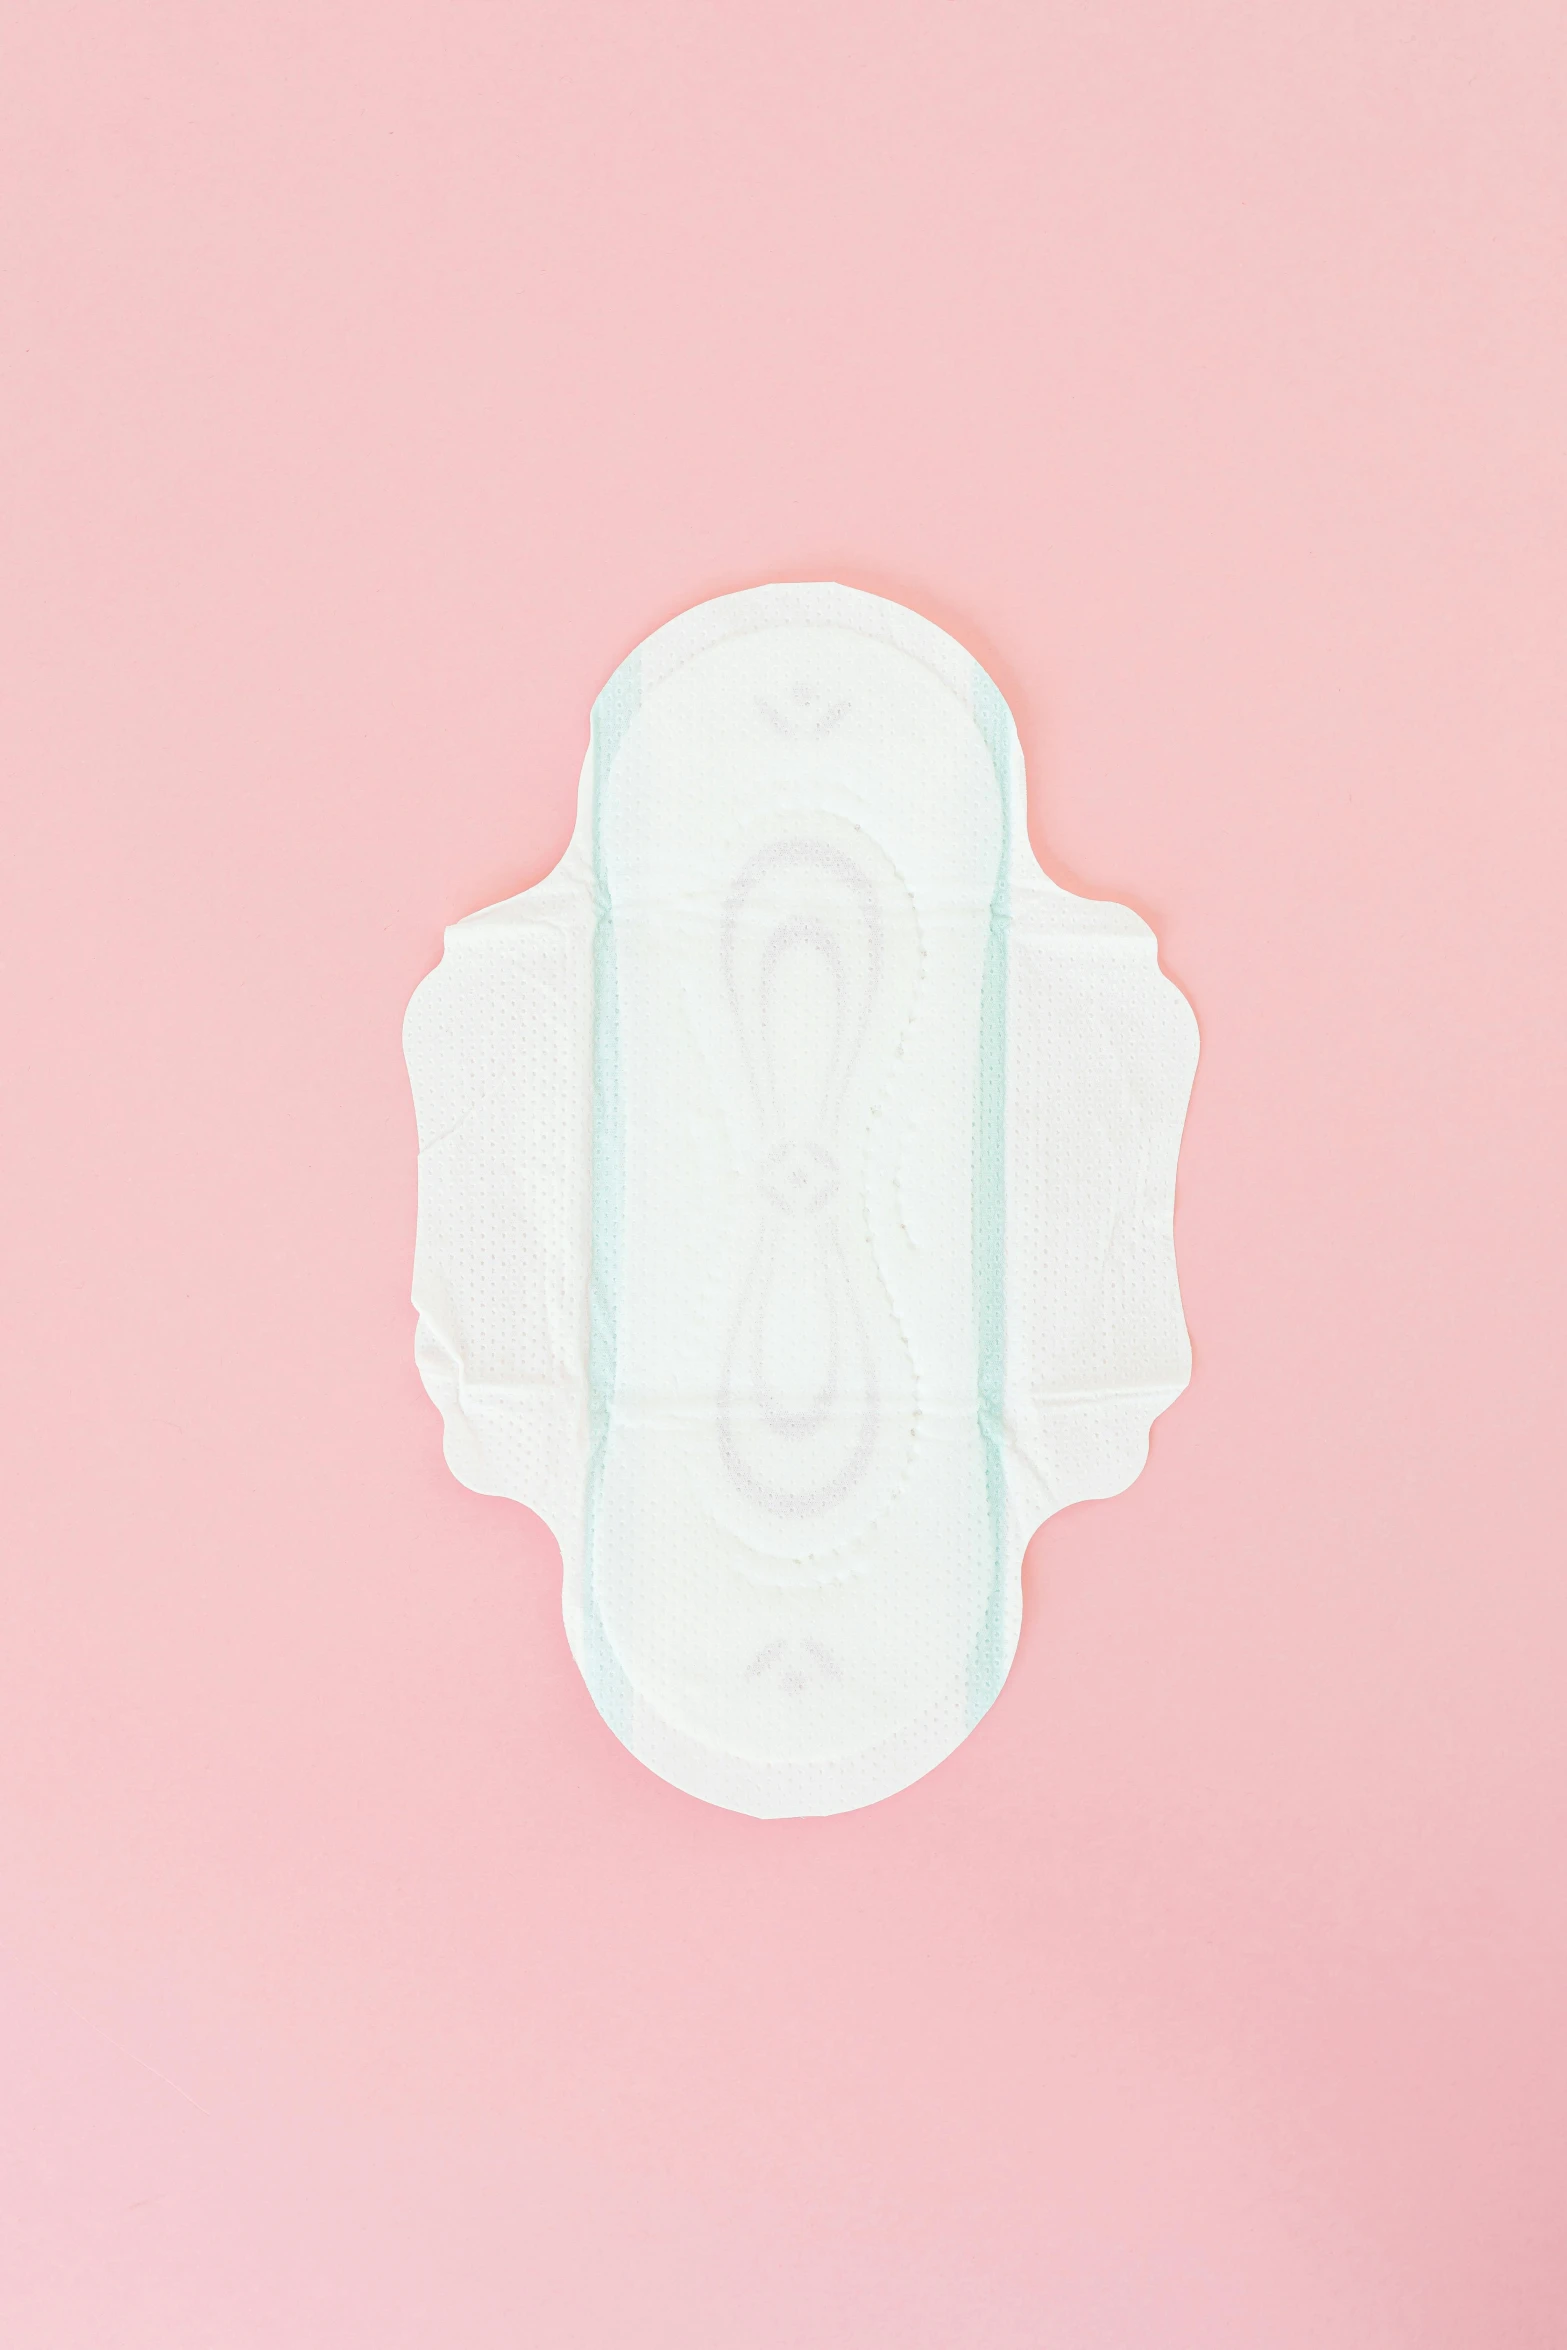 a baby diaper sitting on top of a pink surface, cartouche, feminine shapes, on clear background, instagram post